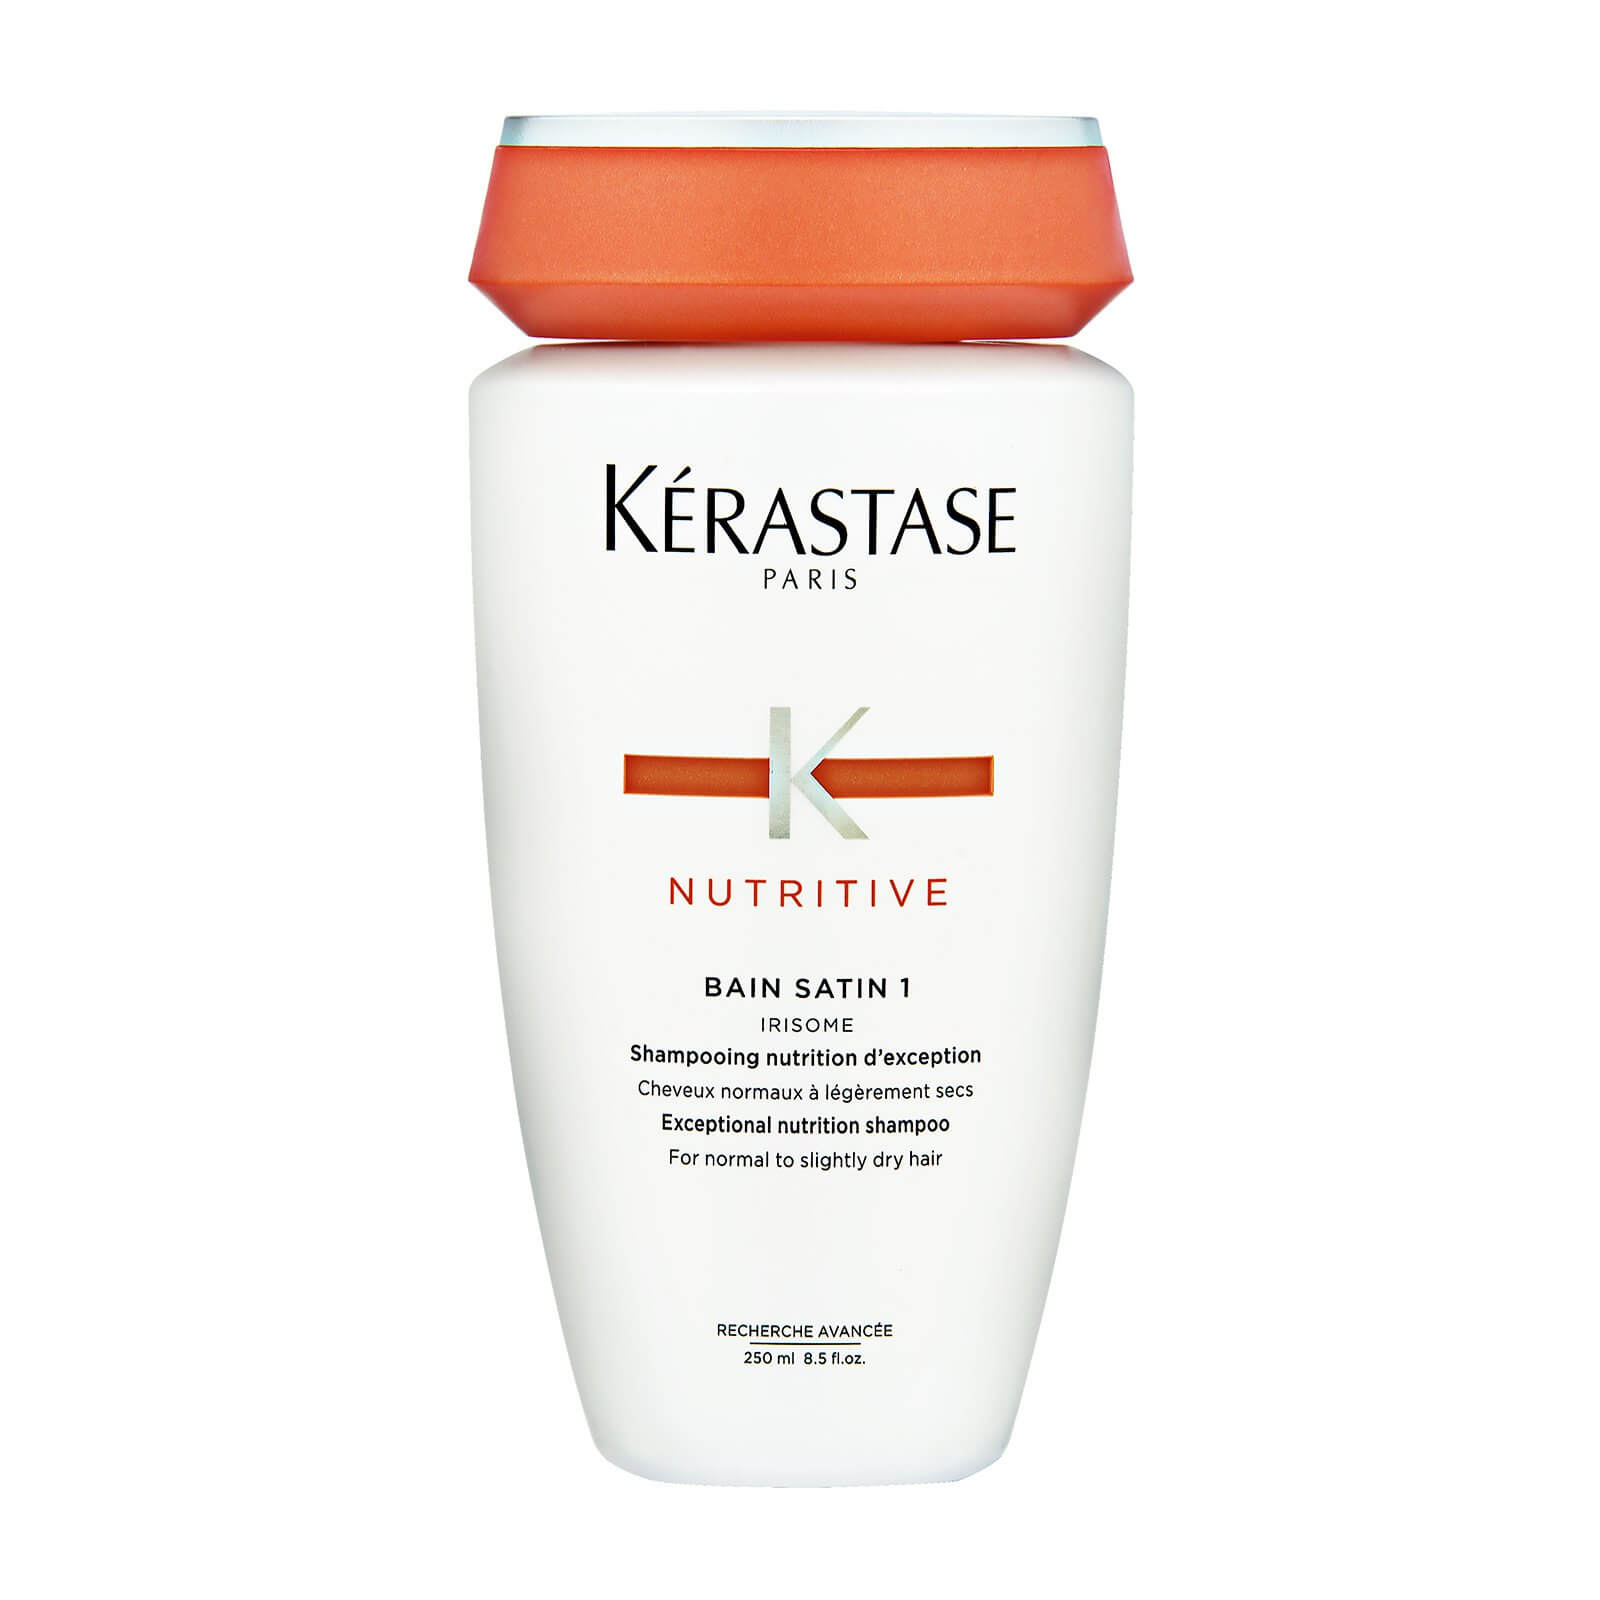 Nutritive Bain Satin 1 Irisome Exceptional Nutrition Shampoo (For Normal To Slightly Dry Hair)